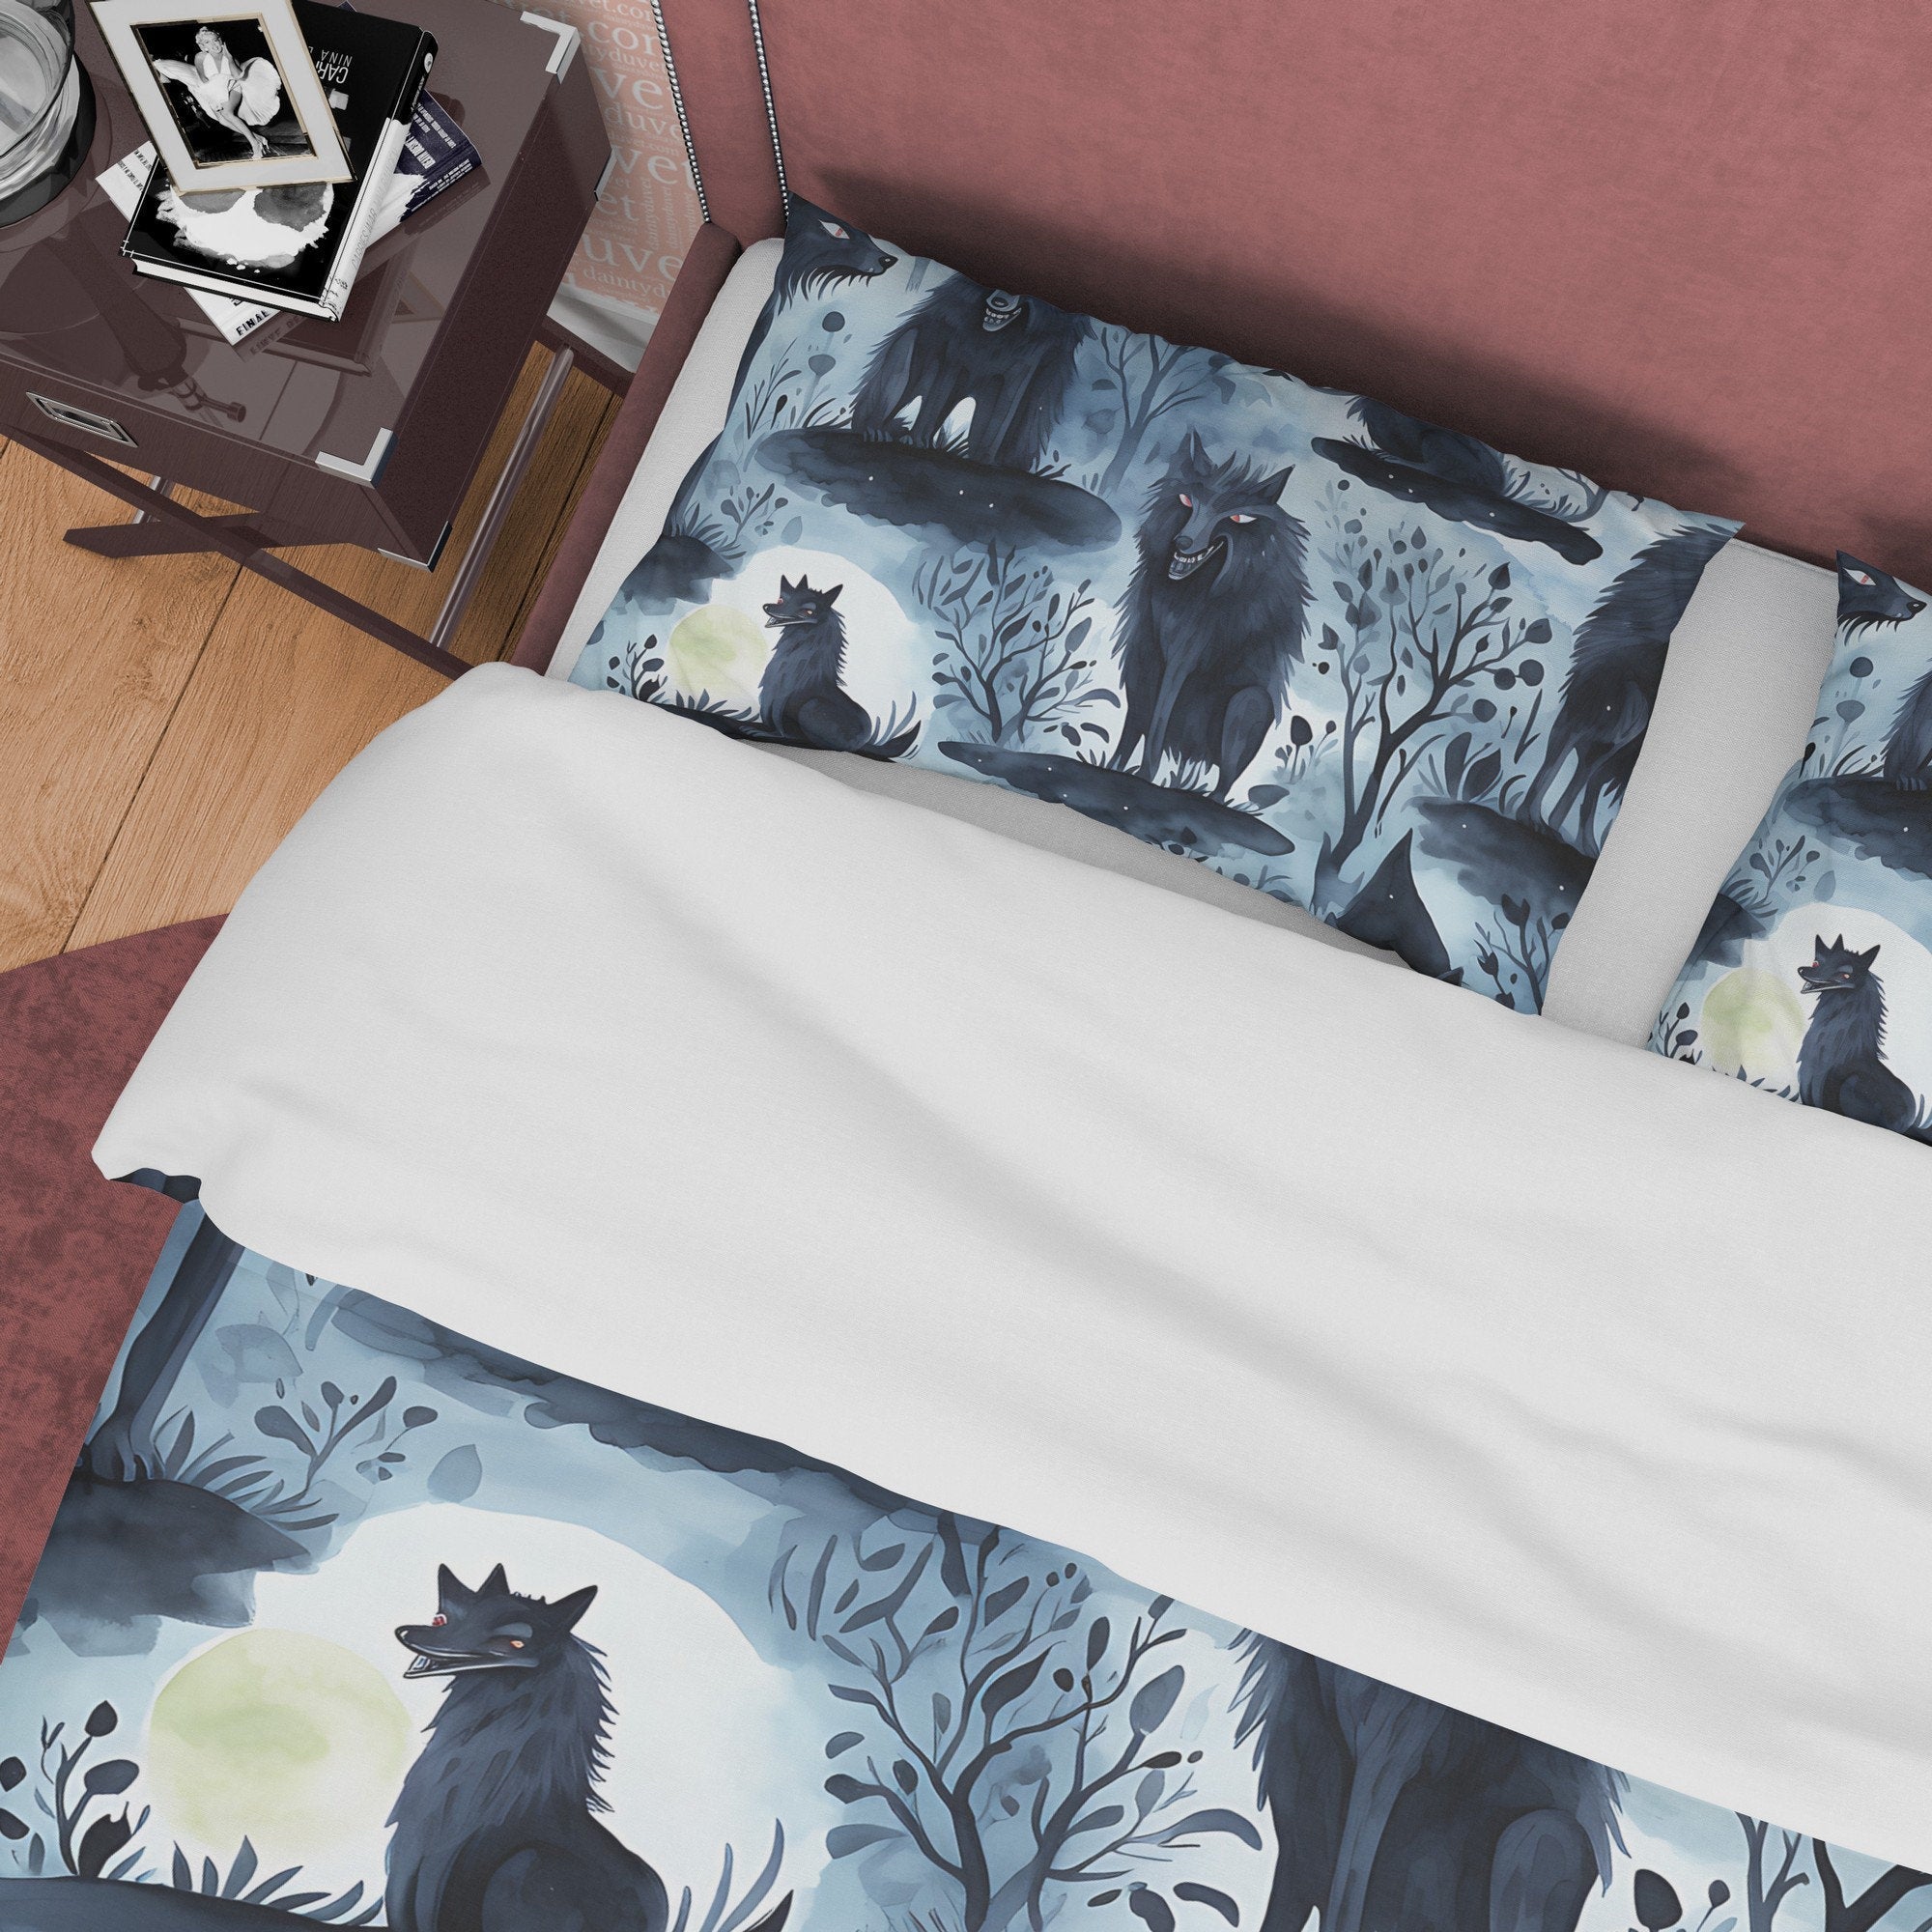 Scary Full Moon Quilt Cover Vampire Wolf Duvet Cover Set, Spooky Night Aesthetic Zipper Bedding, Halloween Room Decor, Unique Gray Bed Cover